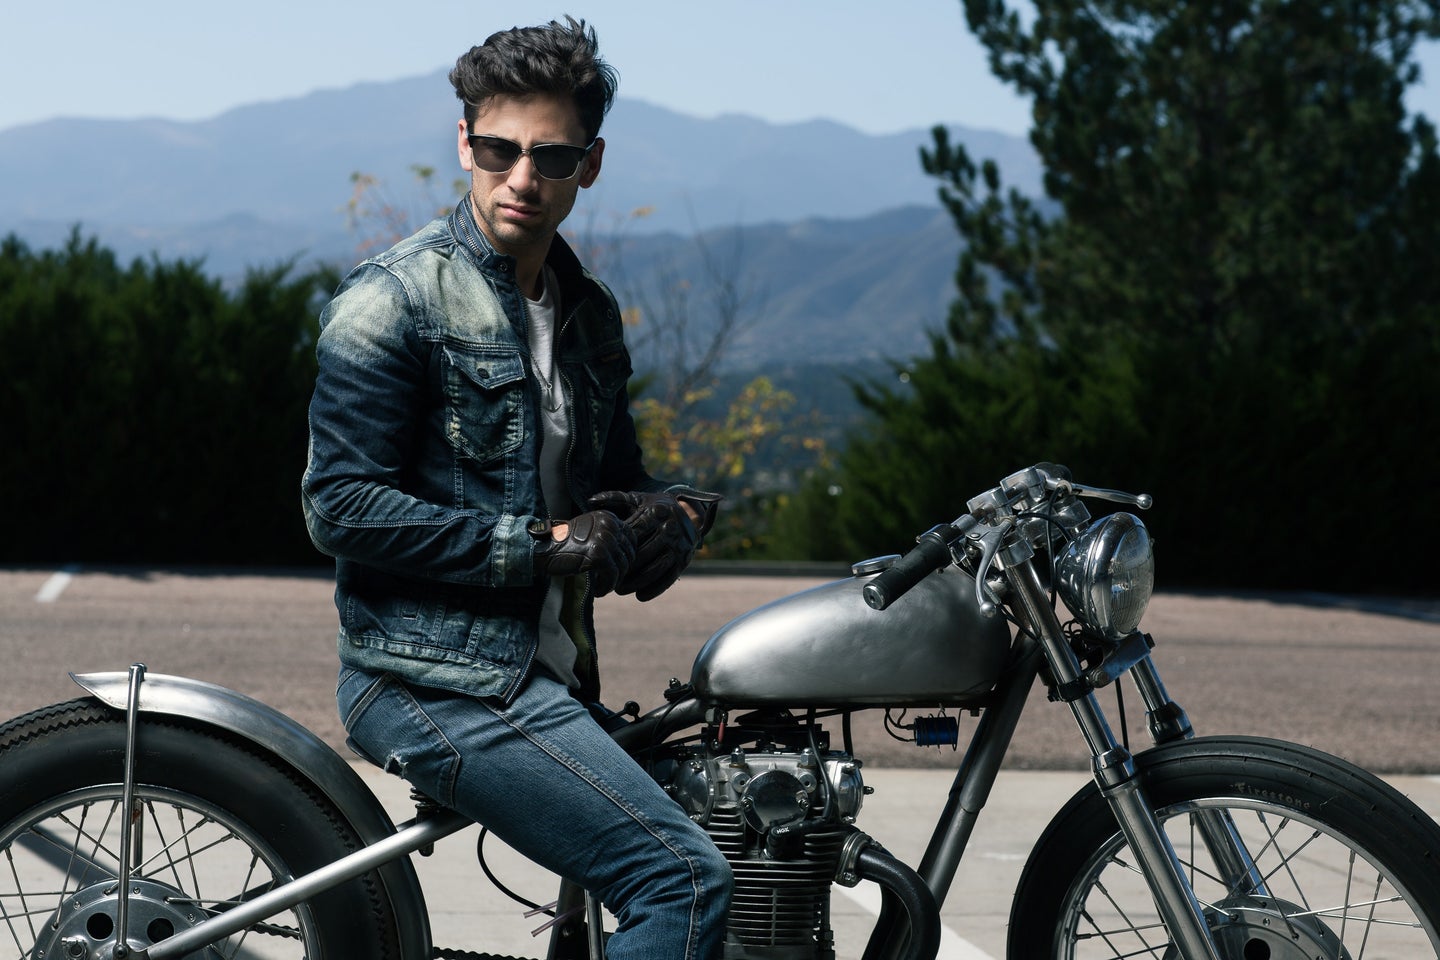 Best Motorcycle Sunglasses: Avoid The Glare and Protect Your Eyes When You Ride